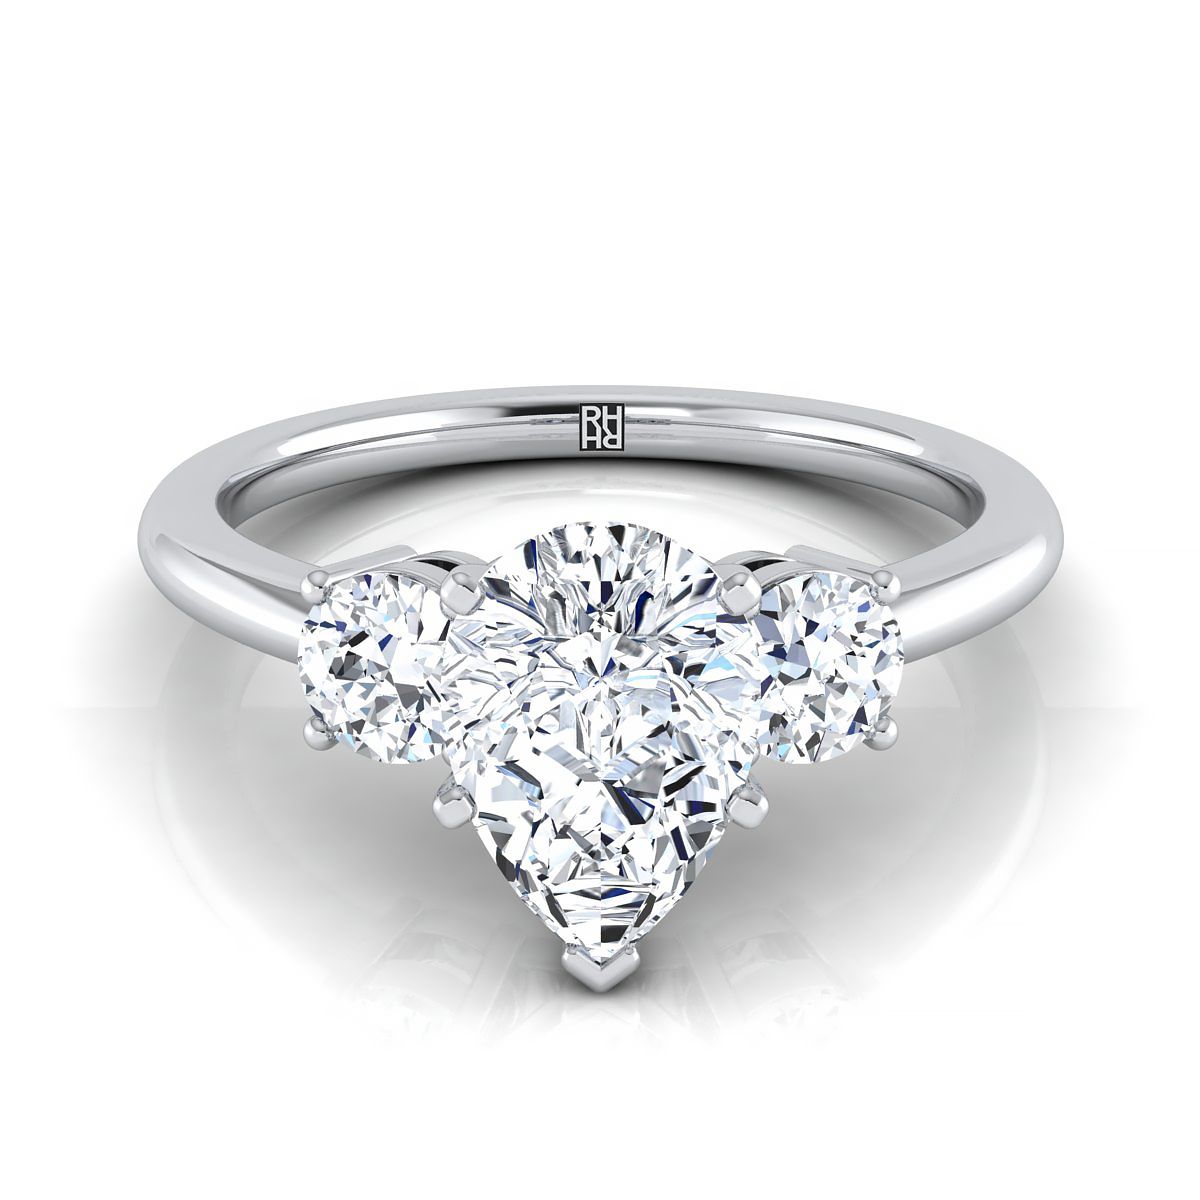 18K White Gold Pear Shape Center Diamond Perfectly Matched Round Three Stone Diamond Engagement Ring -1/4ctw